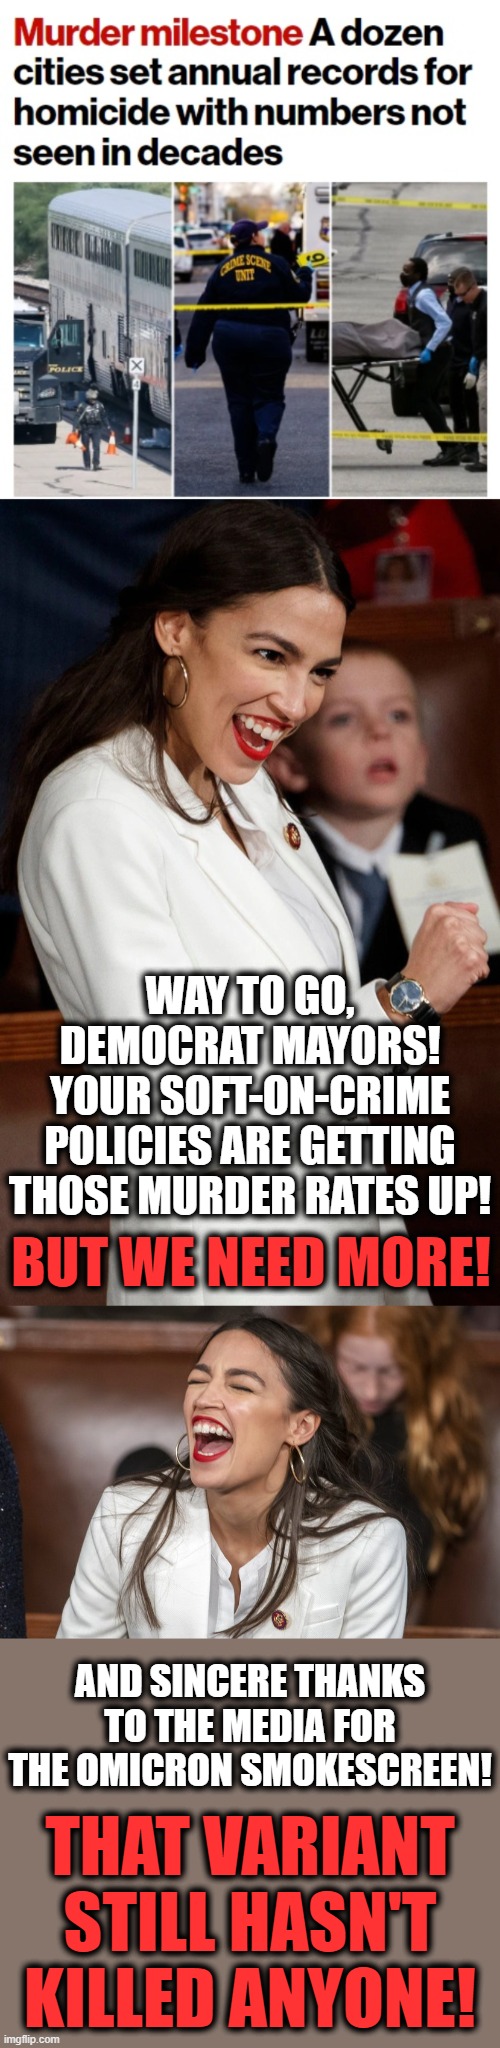 What happens when you vote democrat | WAY TO GO, DEMOCRAT MAYORS!
YOUR SOFT-ON-CRIME POLICIES ARE GETTING THOSE MURDER RATES UP! BUT WE NEED MORE! AND SINCERE THANKS TO THE MEDIA FOR THE OMICRON SMOKESCREEN! THAT VARIANT STILL HASN'T KILLED ANYONE! | image tagged in memes,record homicides,crime,alexandria ocasio-cortez,democrat mayors,omicron | made w/ Imgflip meme maker